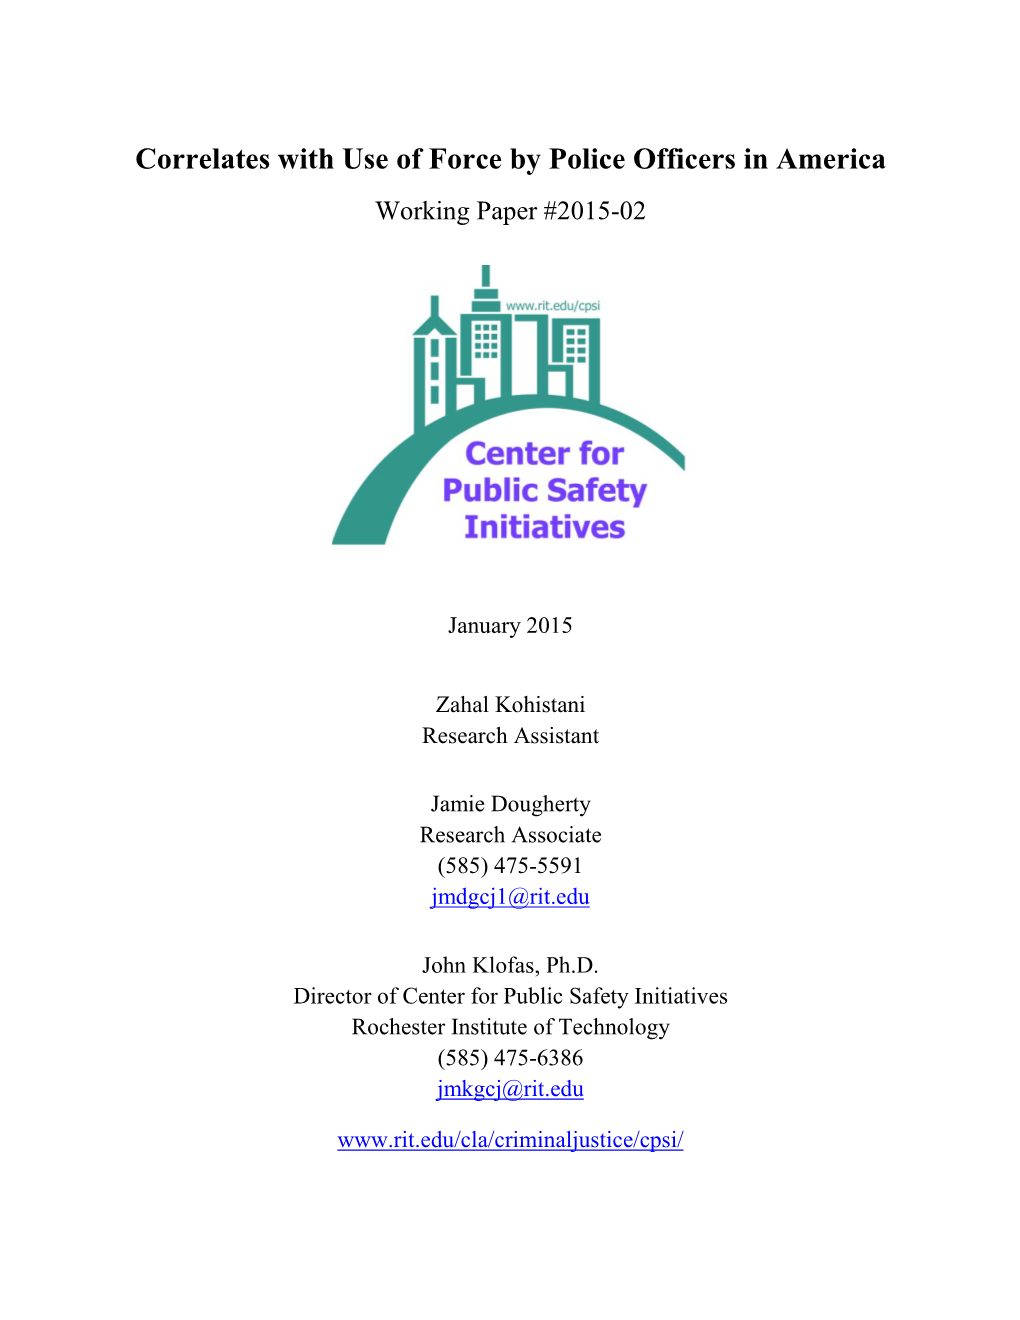 Correlates with Use of Force by Police Officers in America Working Paper #2015-02